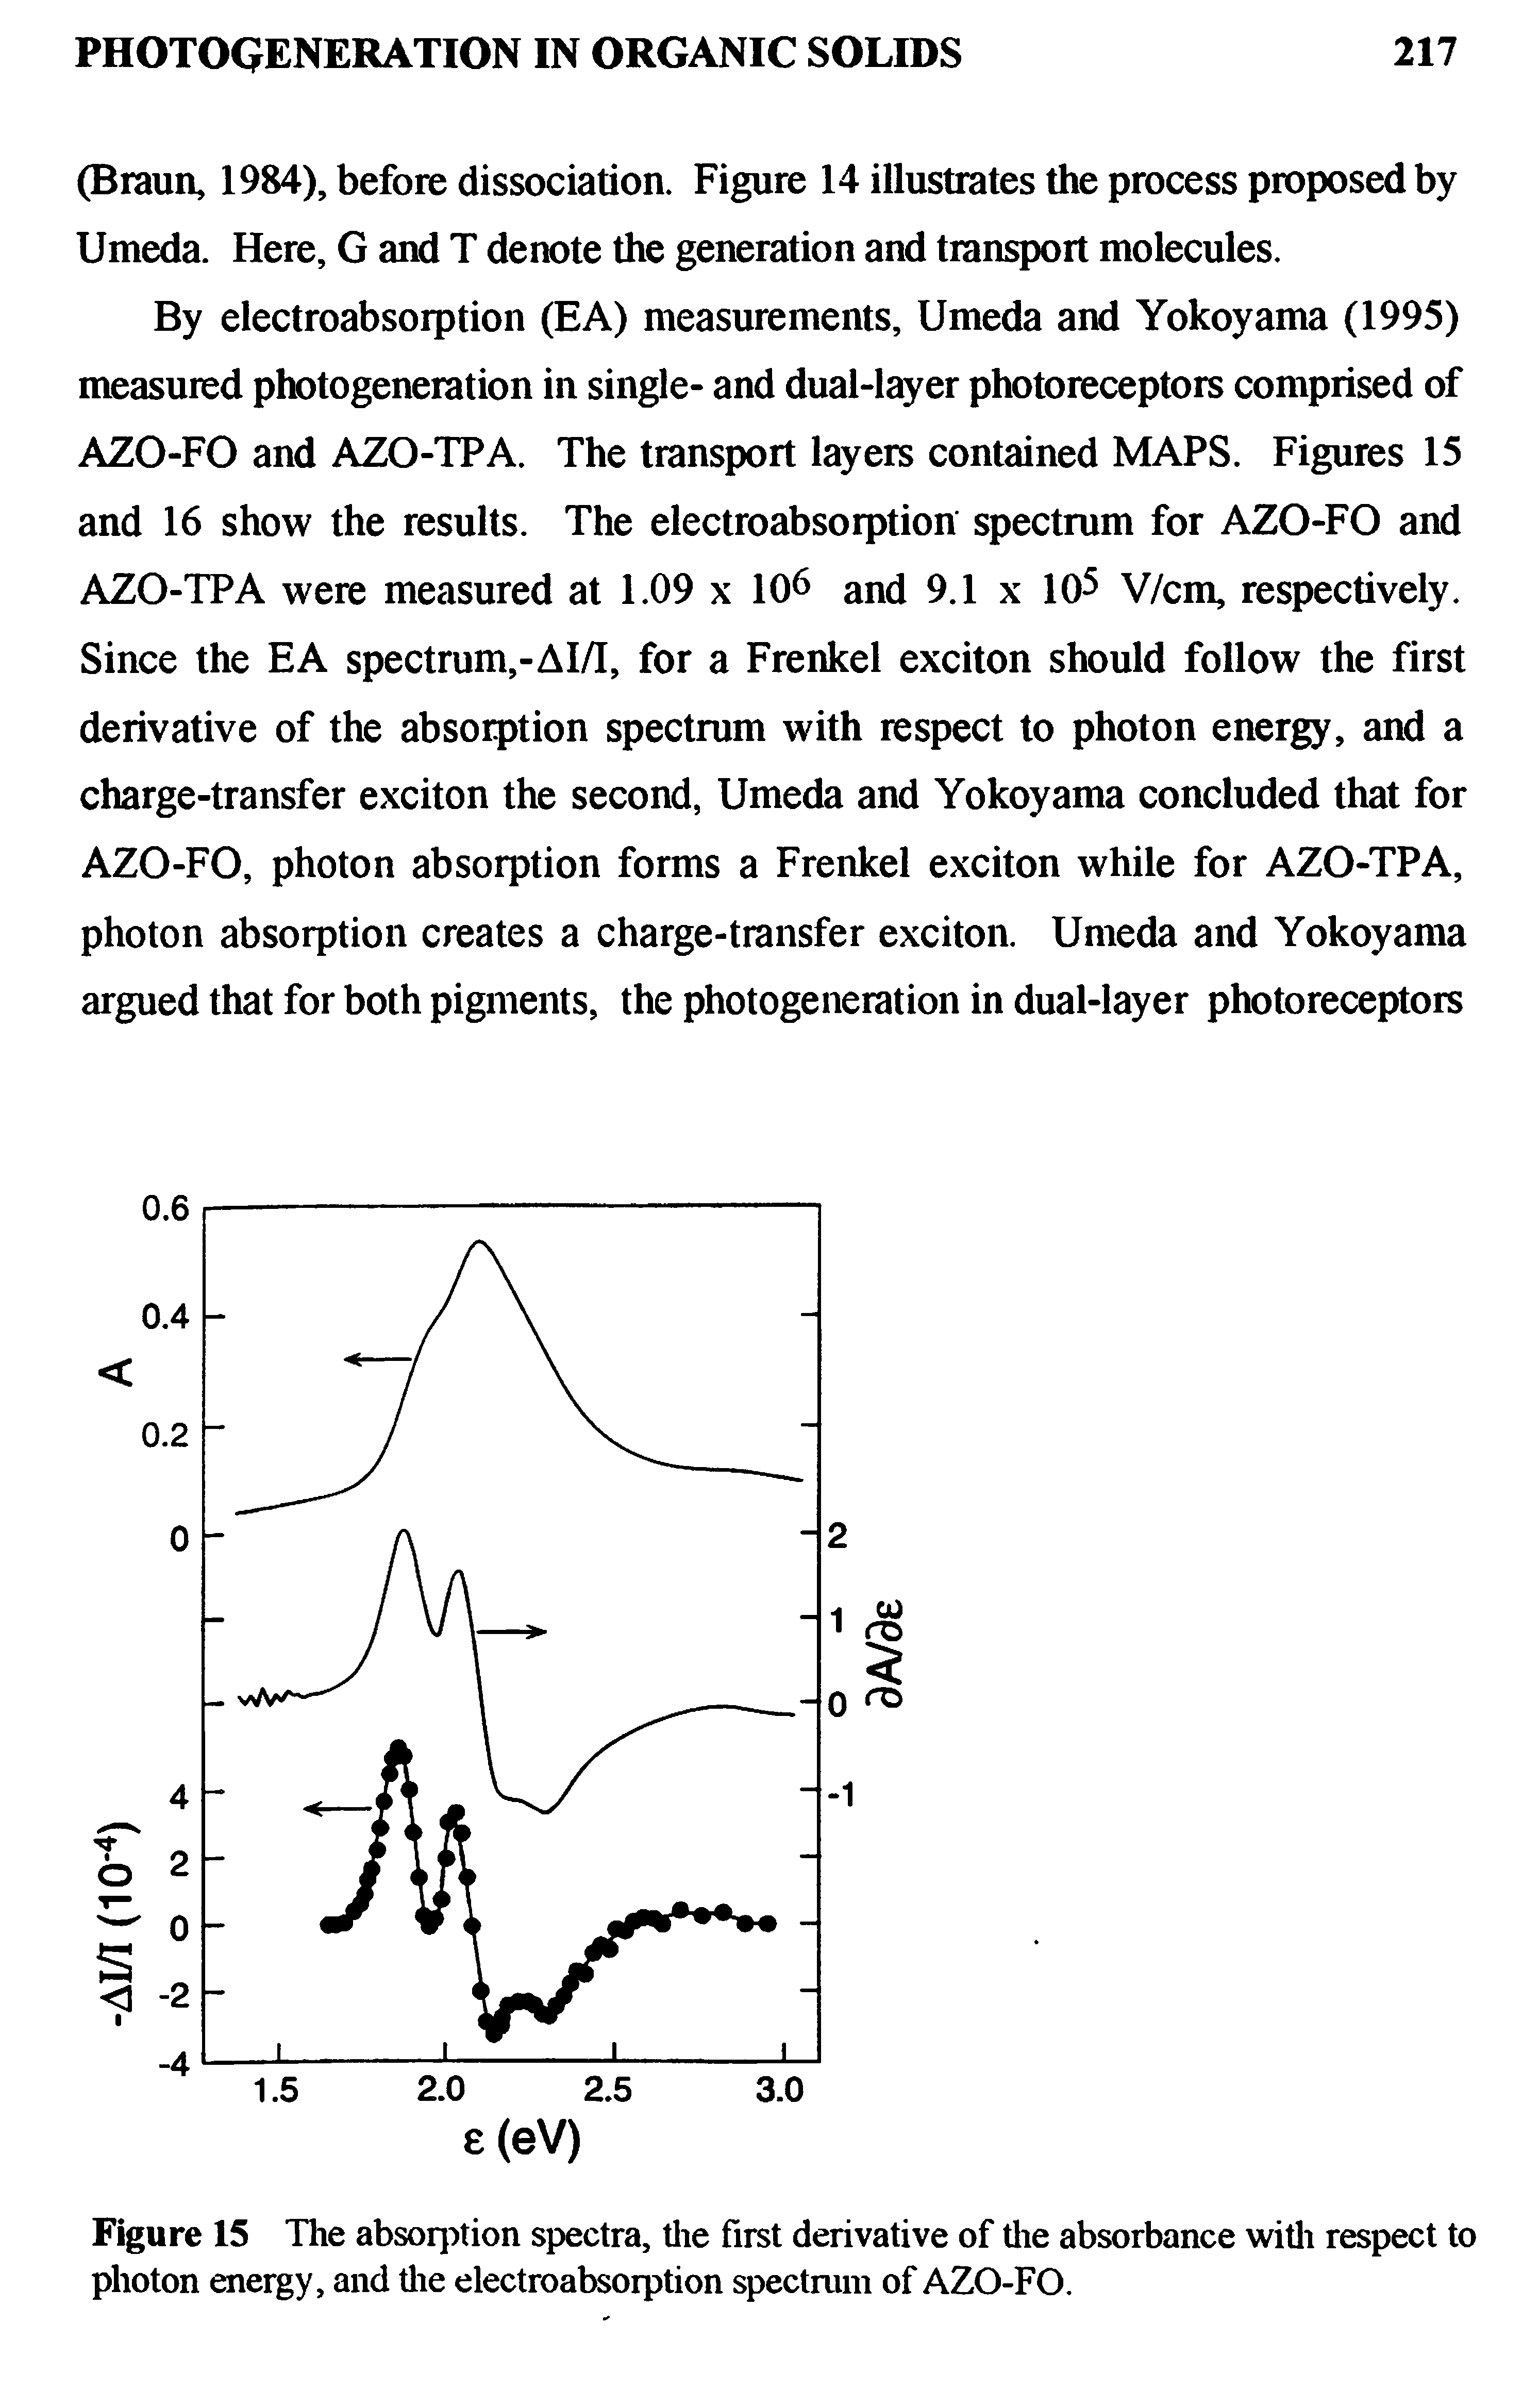 Figure 15 The absorption spectra, the first derivative of the absorbance with respect to photon energy, and the electroabsorption spectrum of AZO-FO.